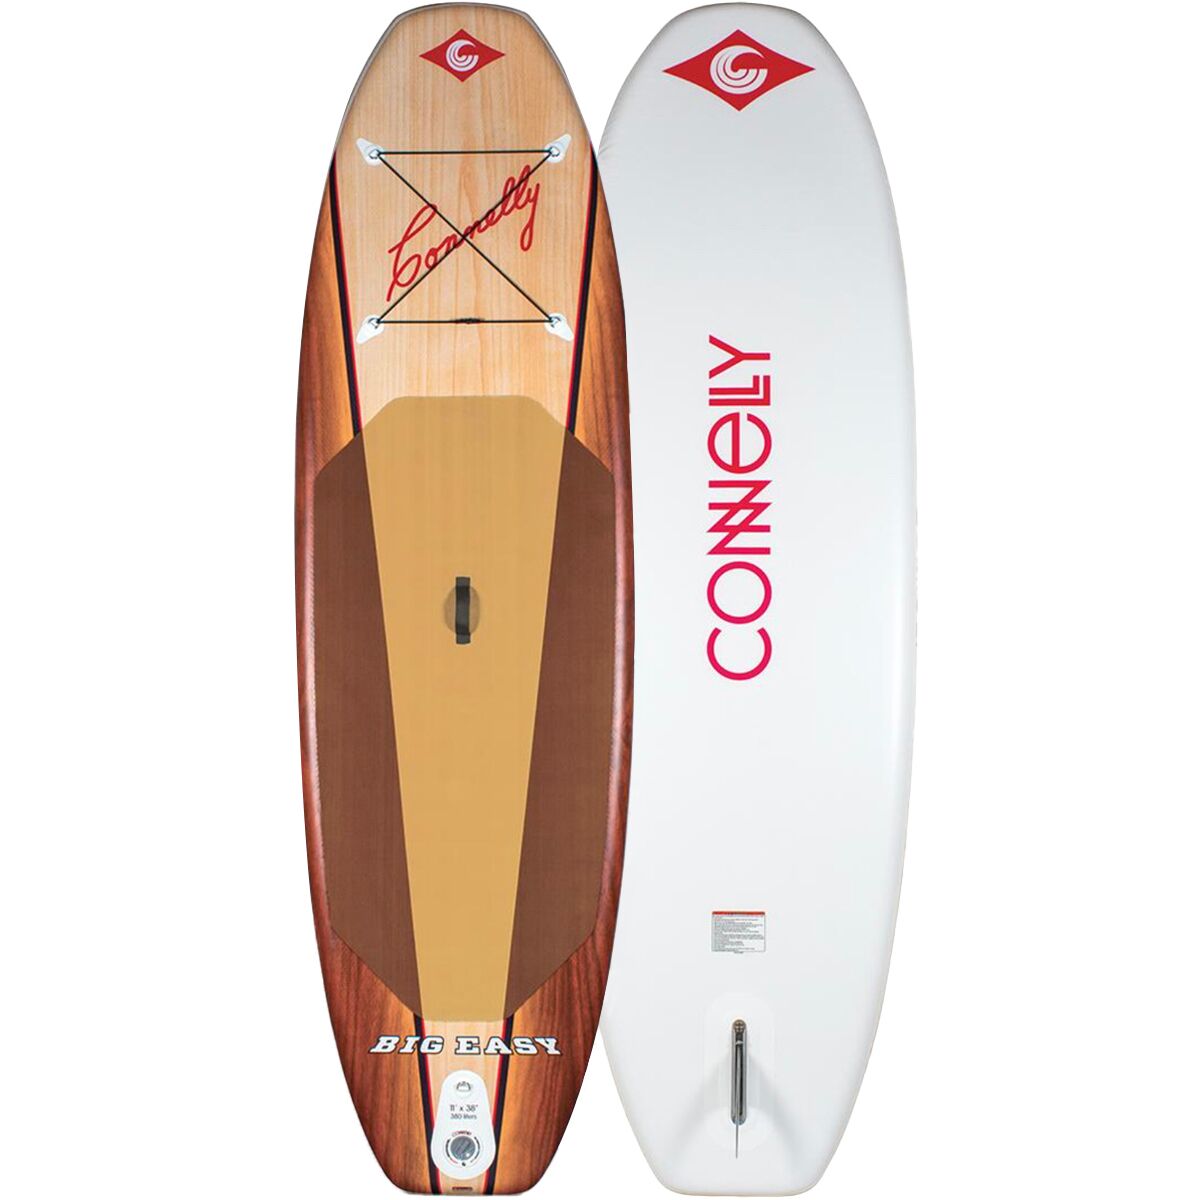 Connelly Skis Big Easy Inflatable Stand-Up Paddleboard